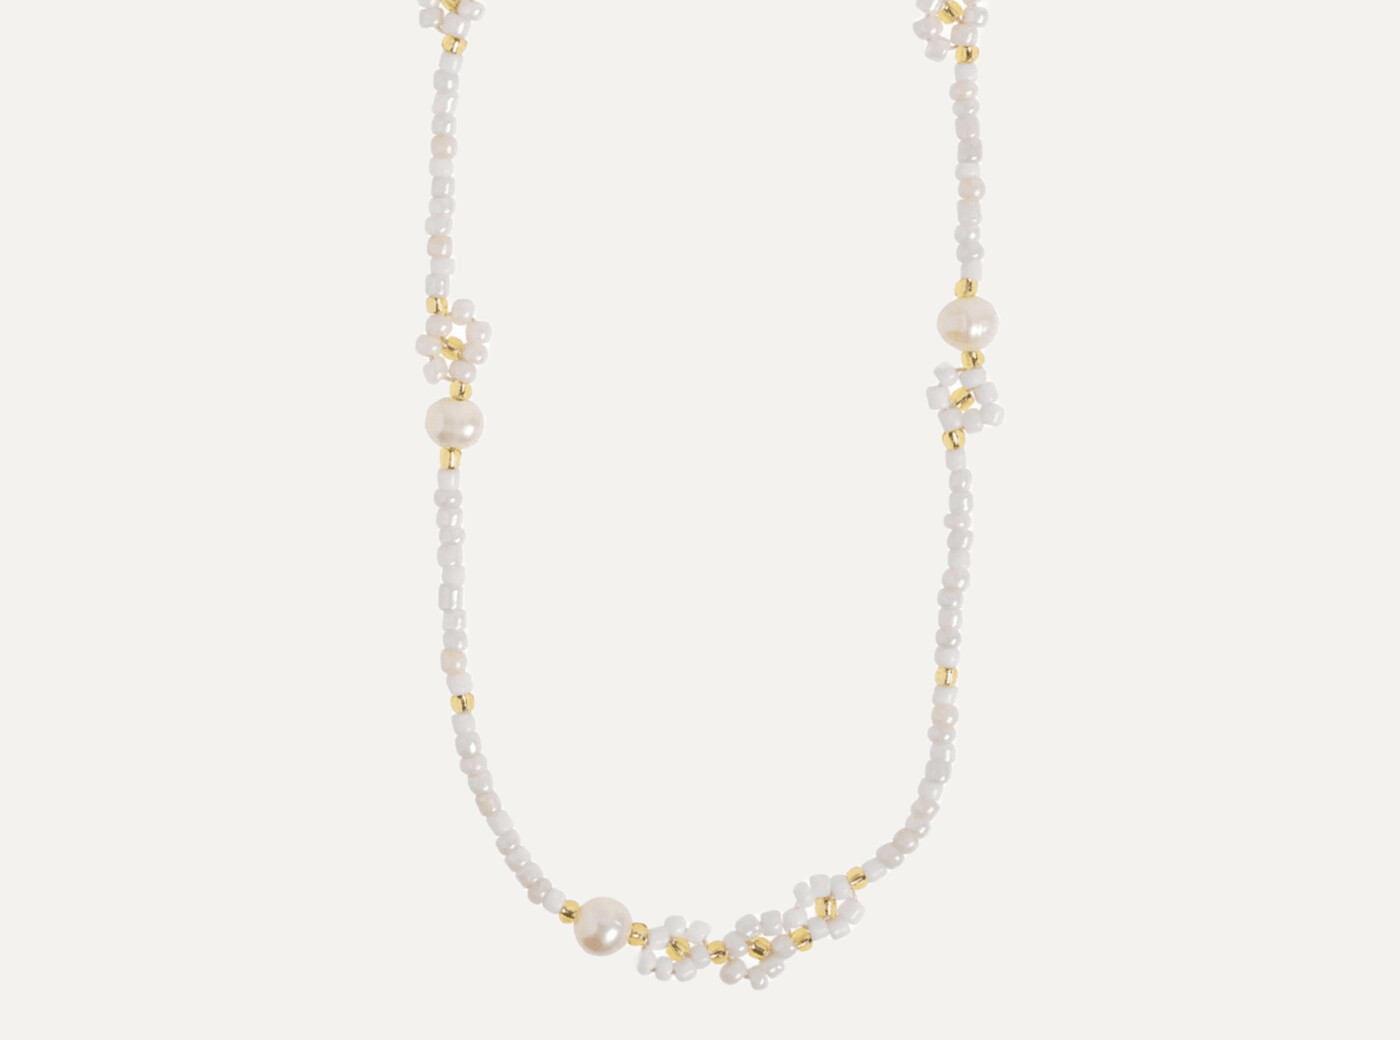 Elsa - White Beads Flower and Pearl Necklace